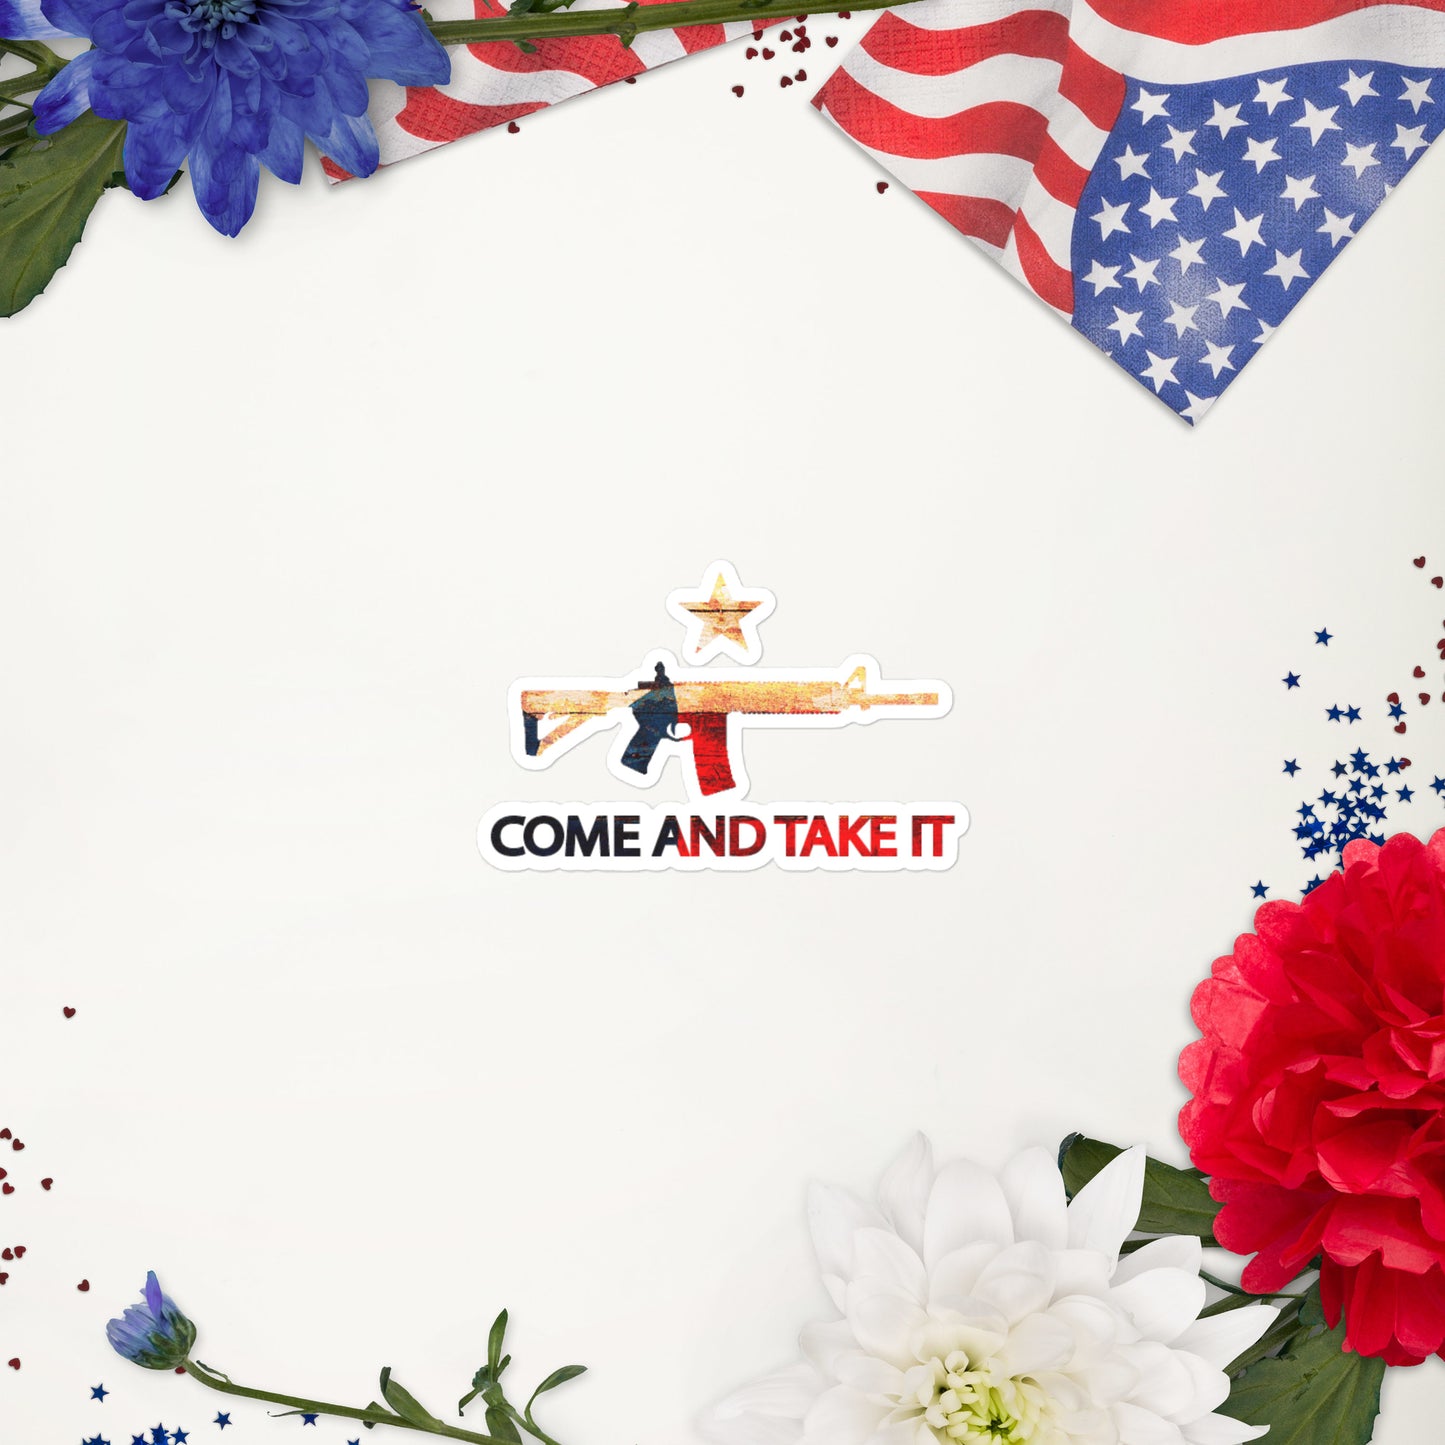 Come And Take It! (Texas Flag) Bubble-free stickers